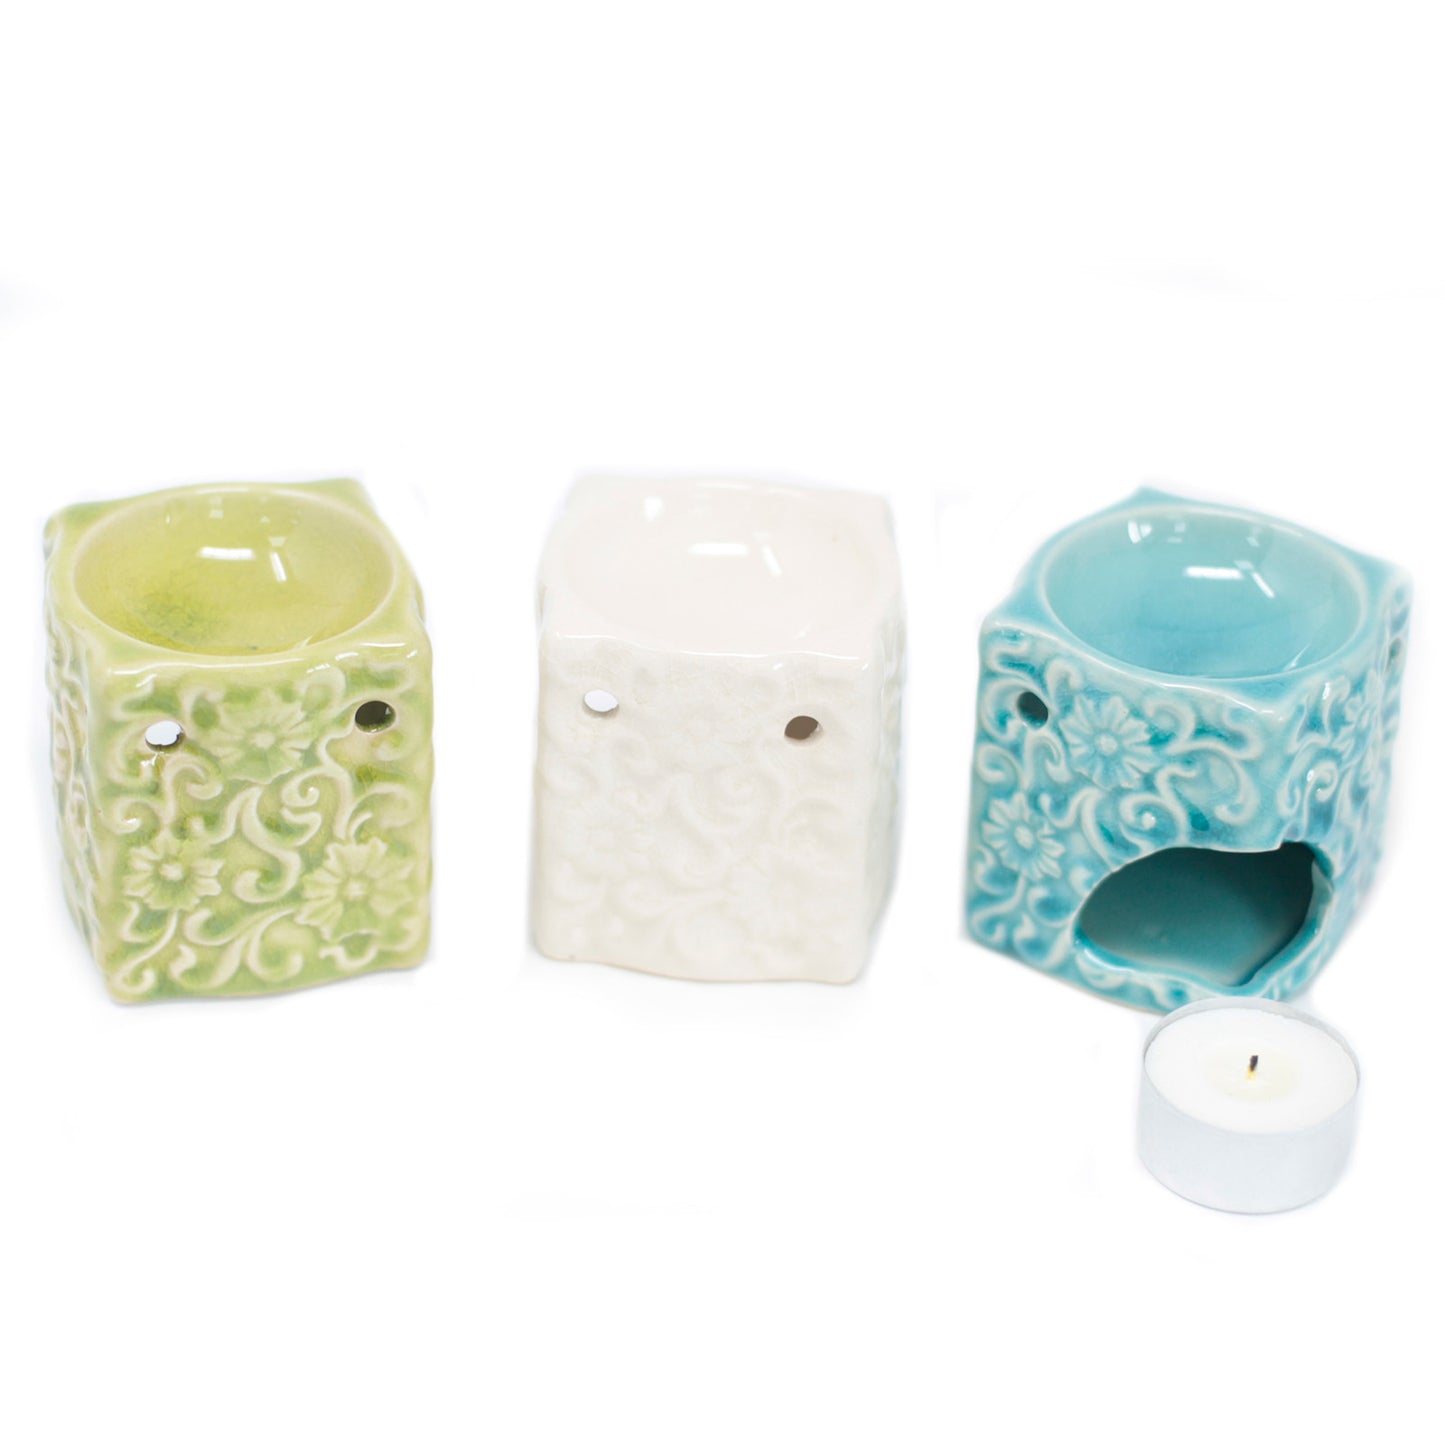 Classic Small Square Floral Oil Burners (aast)